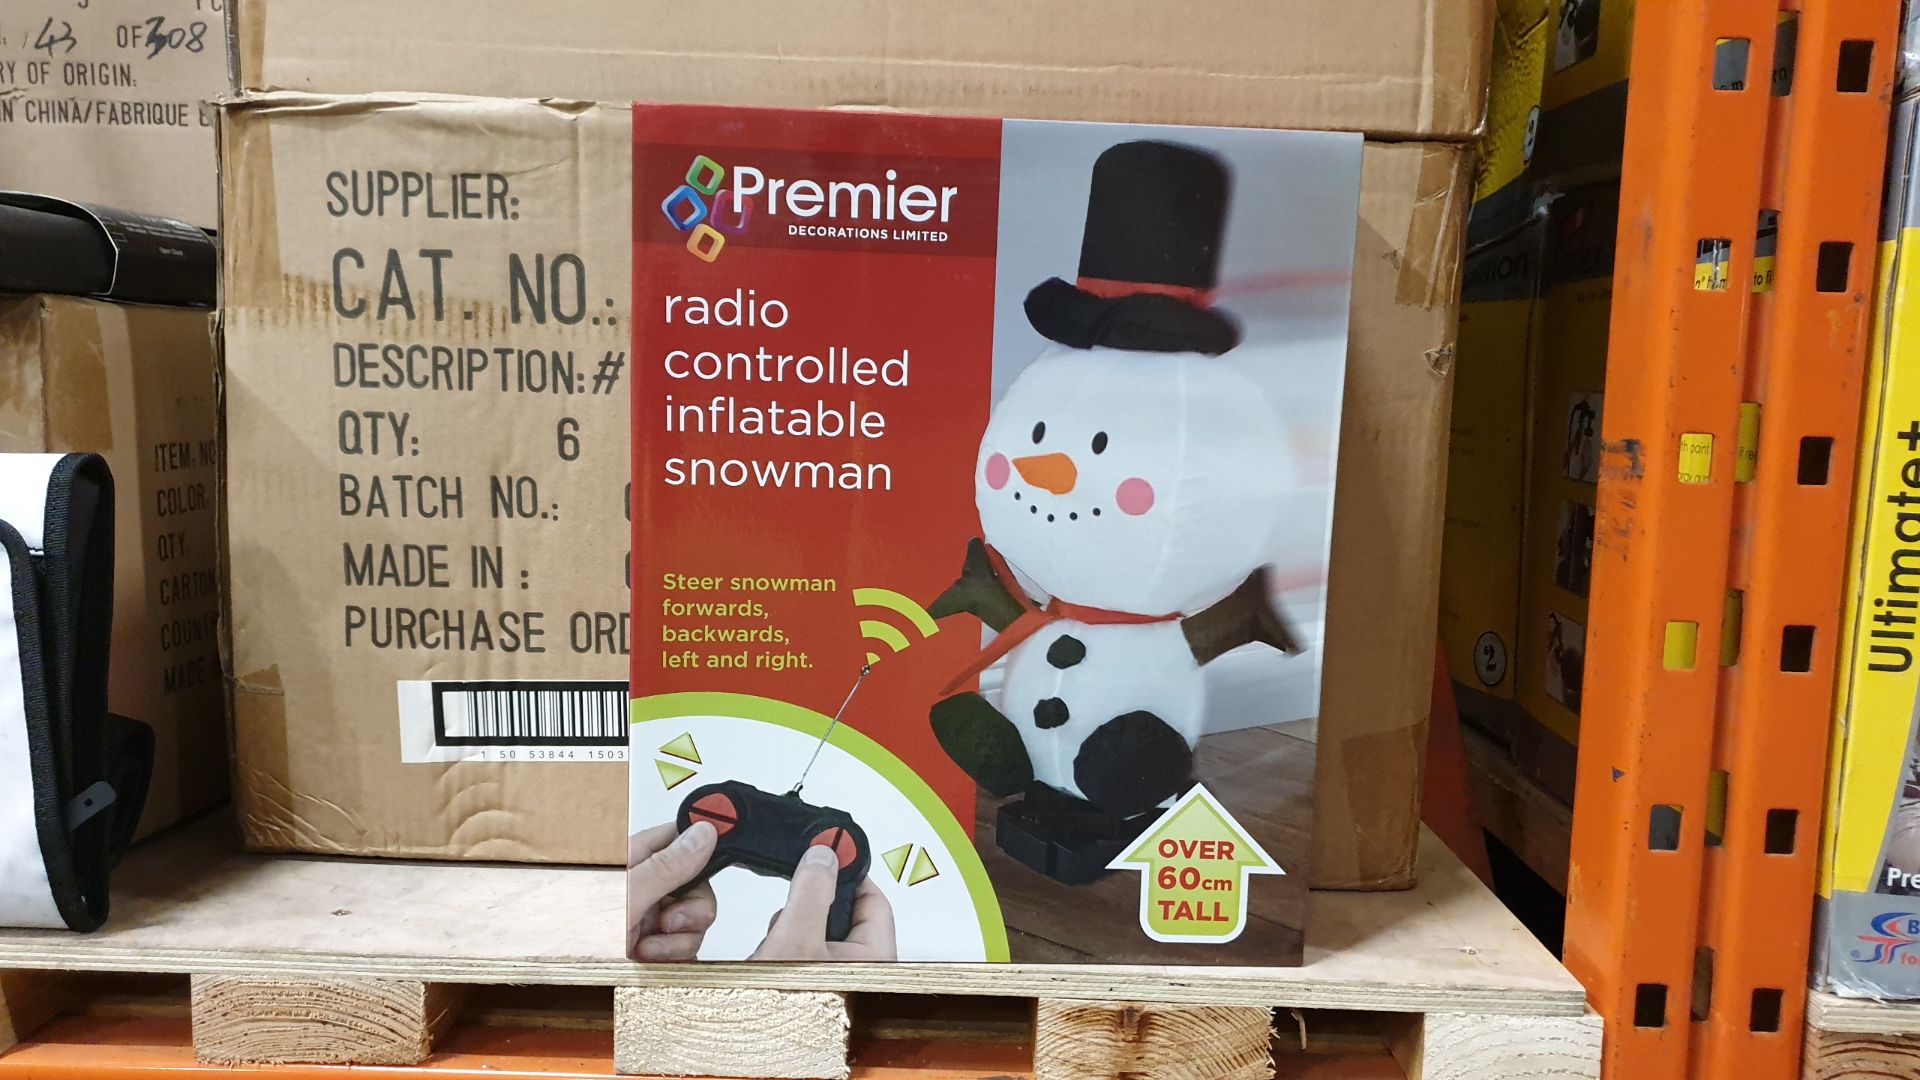 30 X RADIO CONTROLED INFLATABLE SNOWMANOVER 60CM TALL IN 5 BOXES